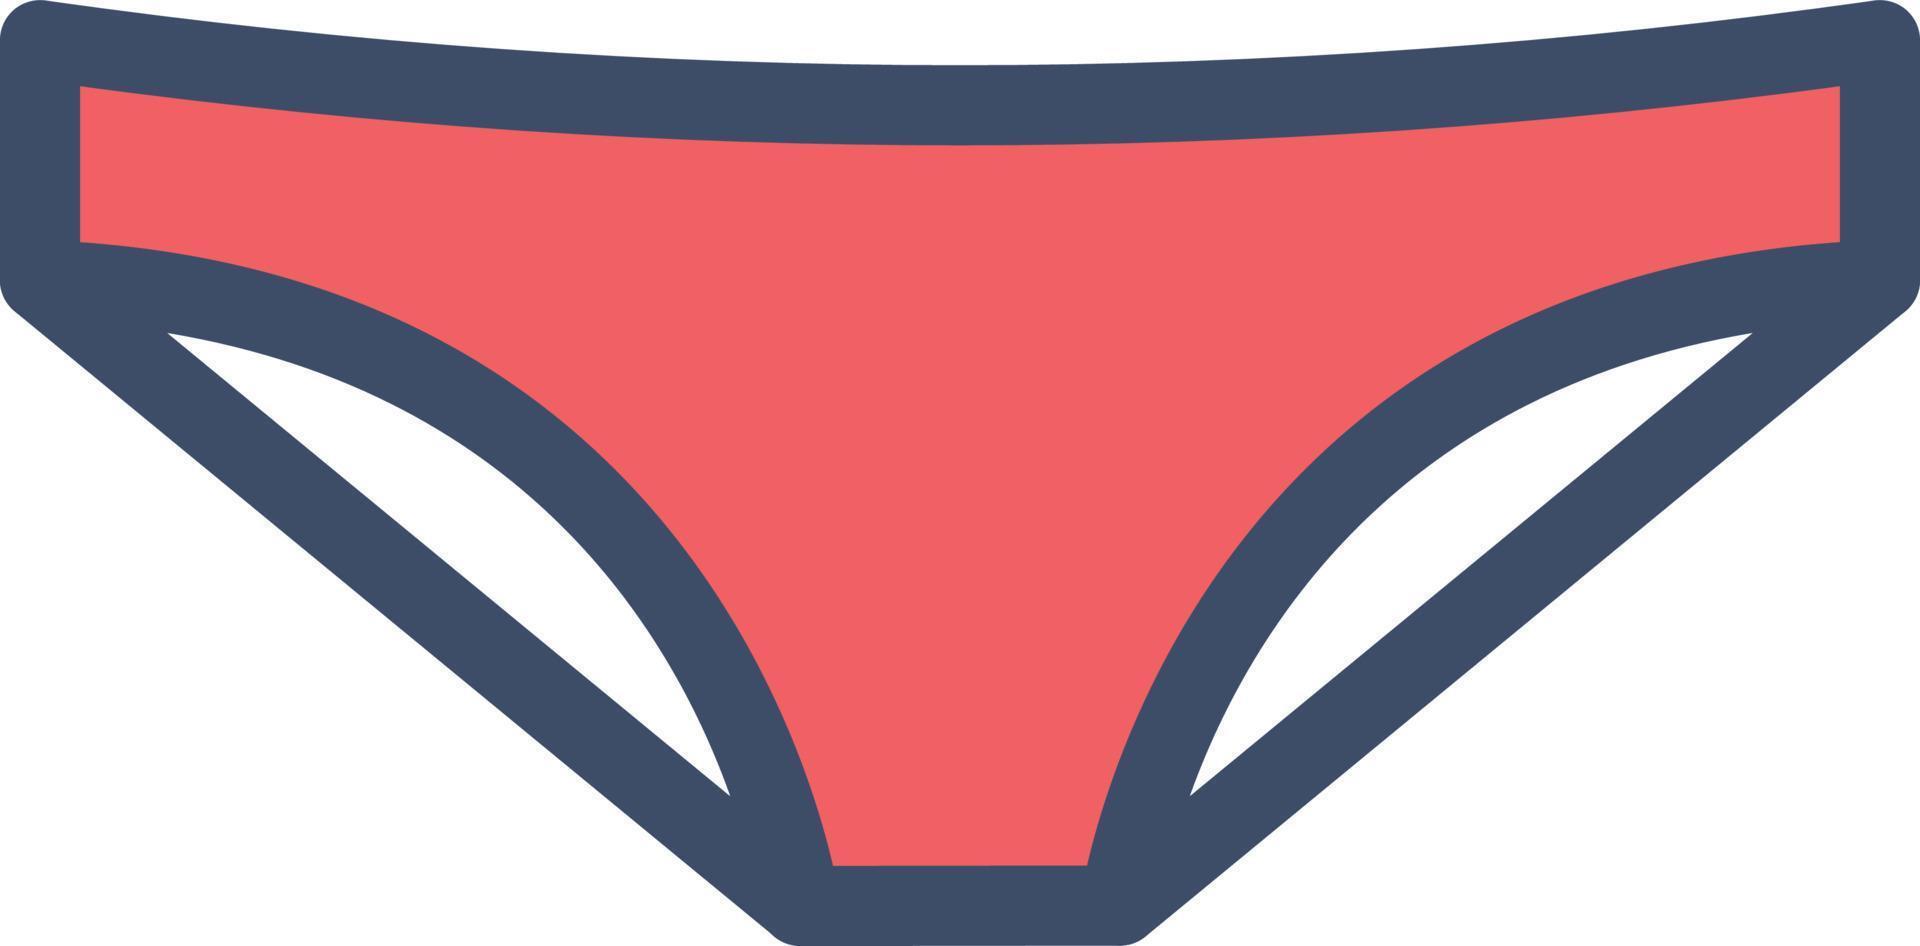 under wear vector illustration on a background.Premium quality symbols.vector icons for concept and graphic design.